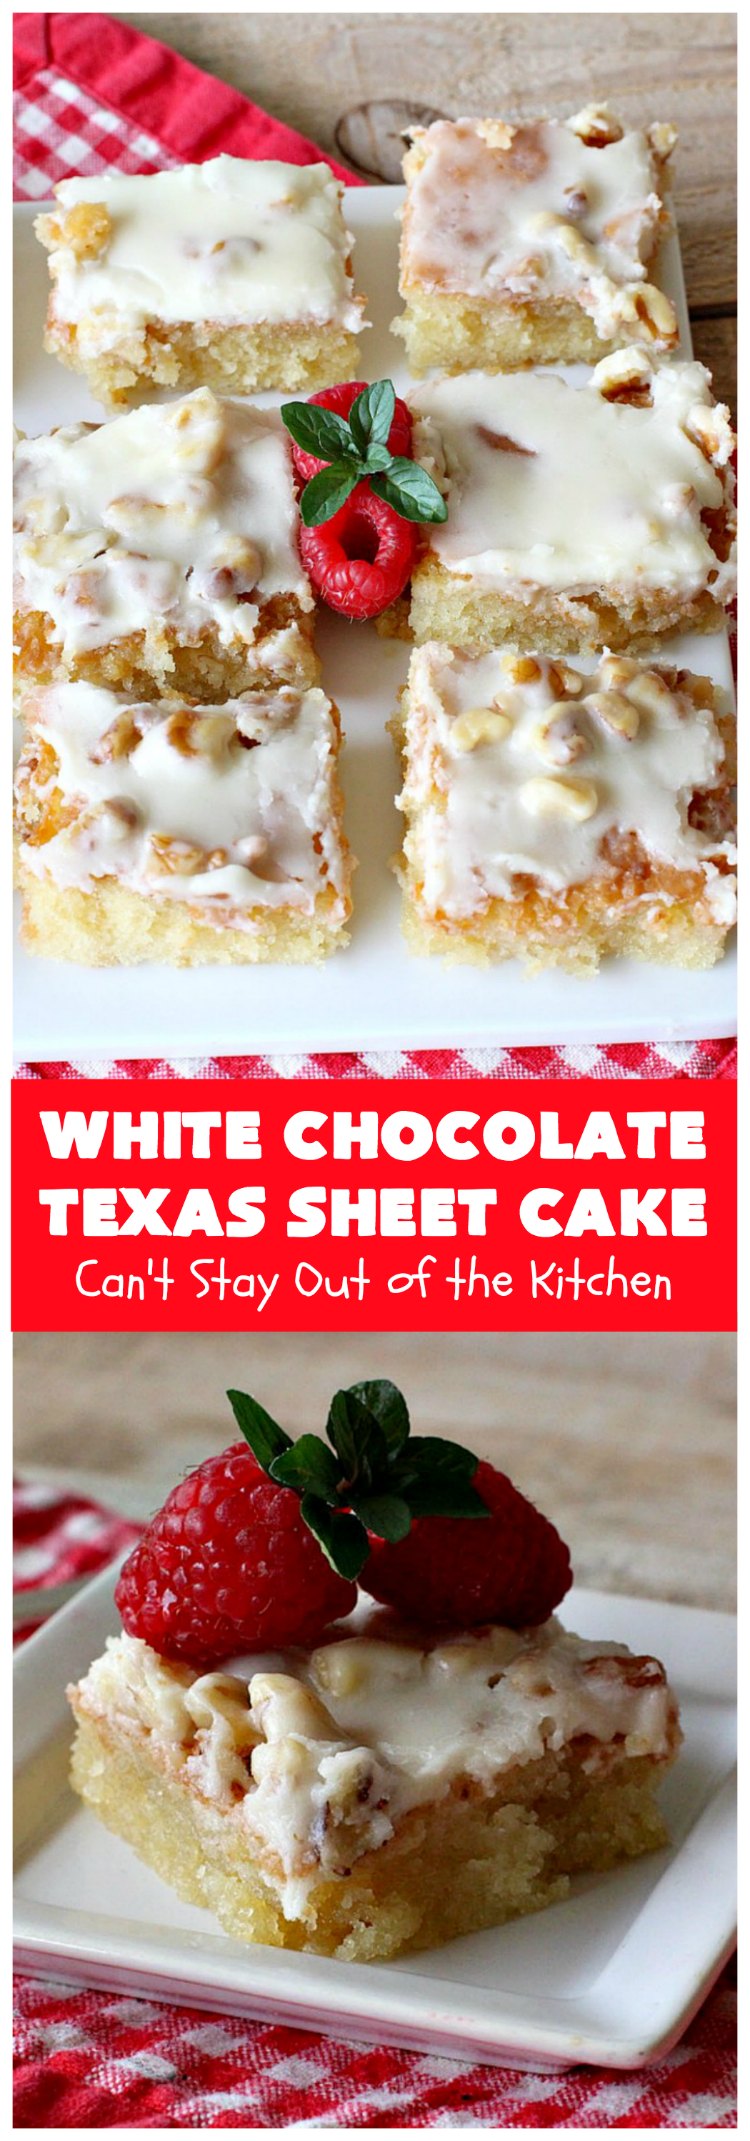 White Chocolate Texas Sheet Cake | Can't Stay Out of the Kitchen | spectacular #TexasSheetCake made with #Ghirardelli #WhiteChocolate instead! Terrific for potlucks, #tailgating parties or any kind of family get-together. #holiday #chocolate #HolidayDessert #ChocolateDessert #WhiteChocolateTexasSheetCake